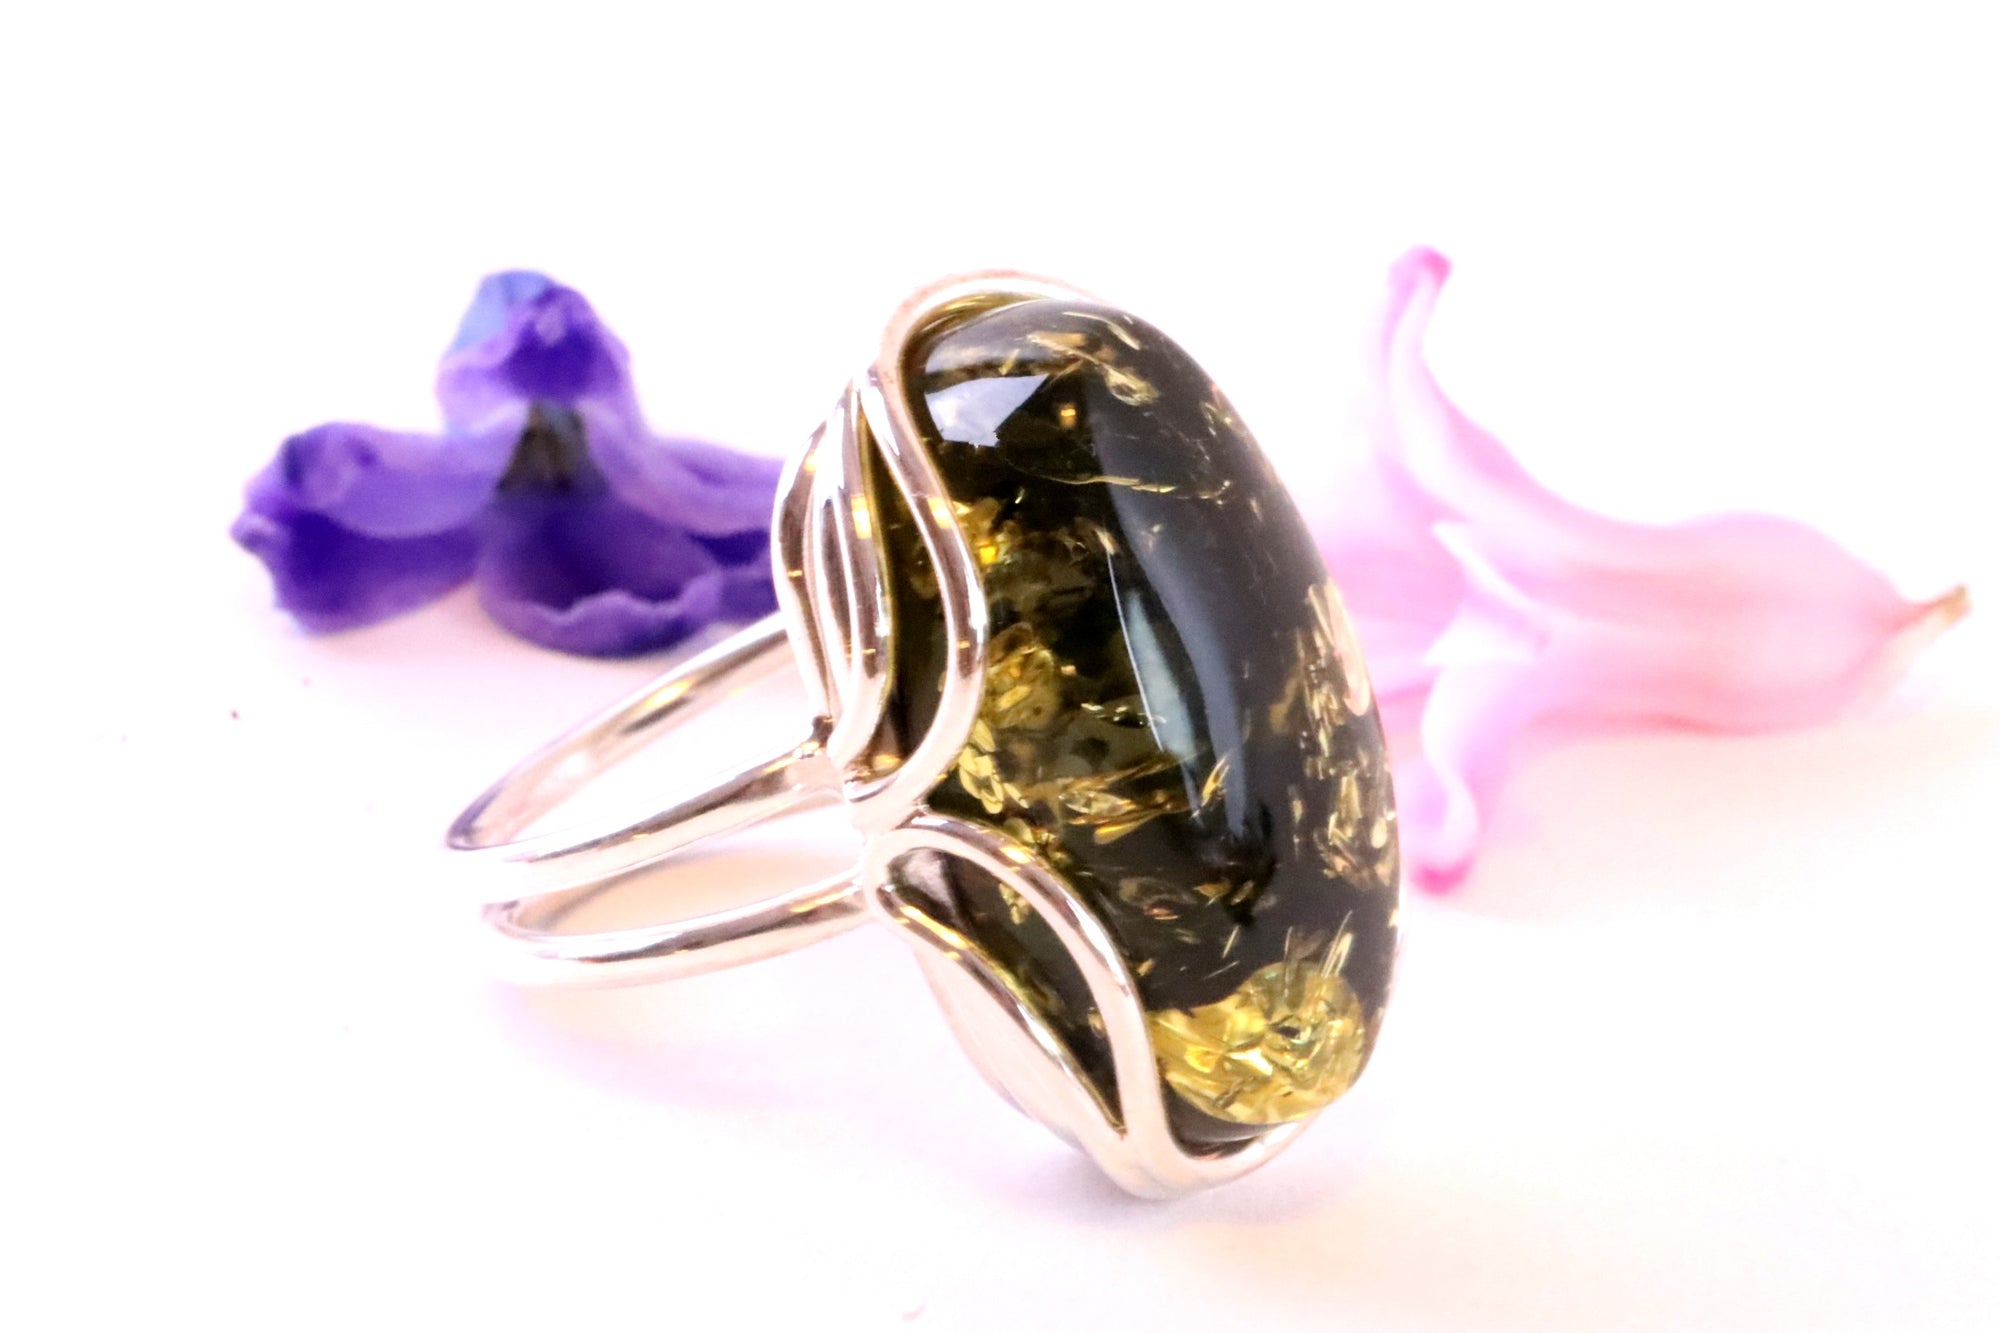 925 Sterling Silver Green Baltic Amber Ring